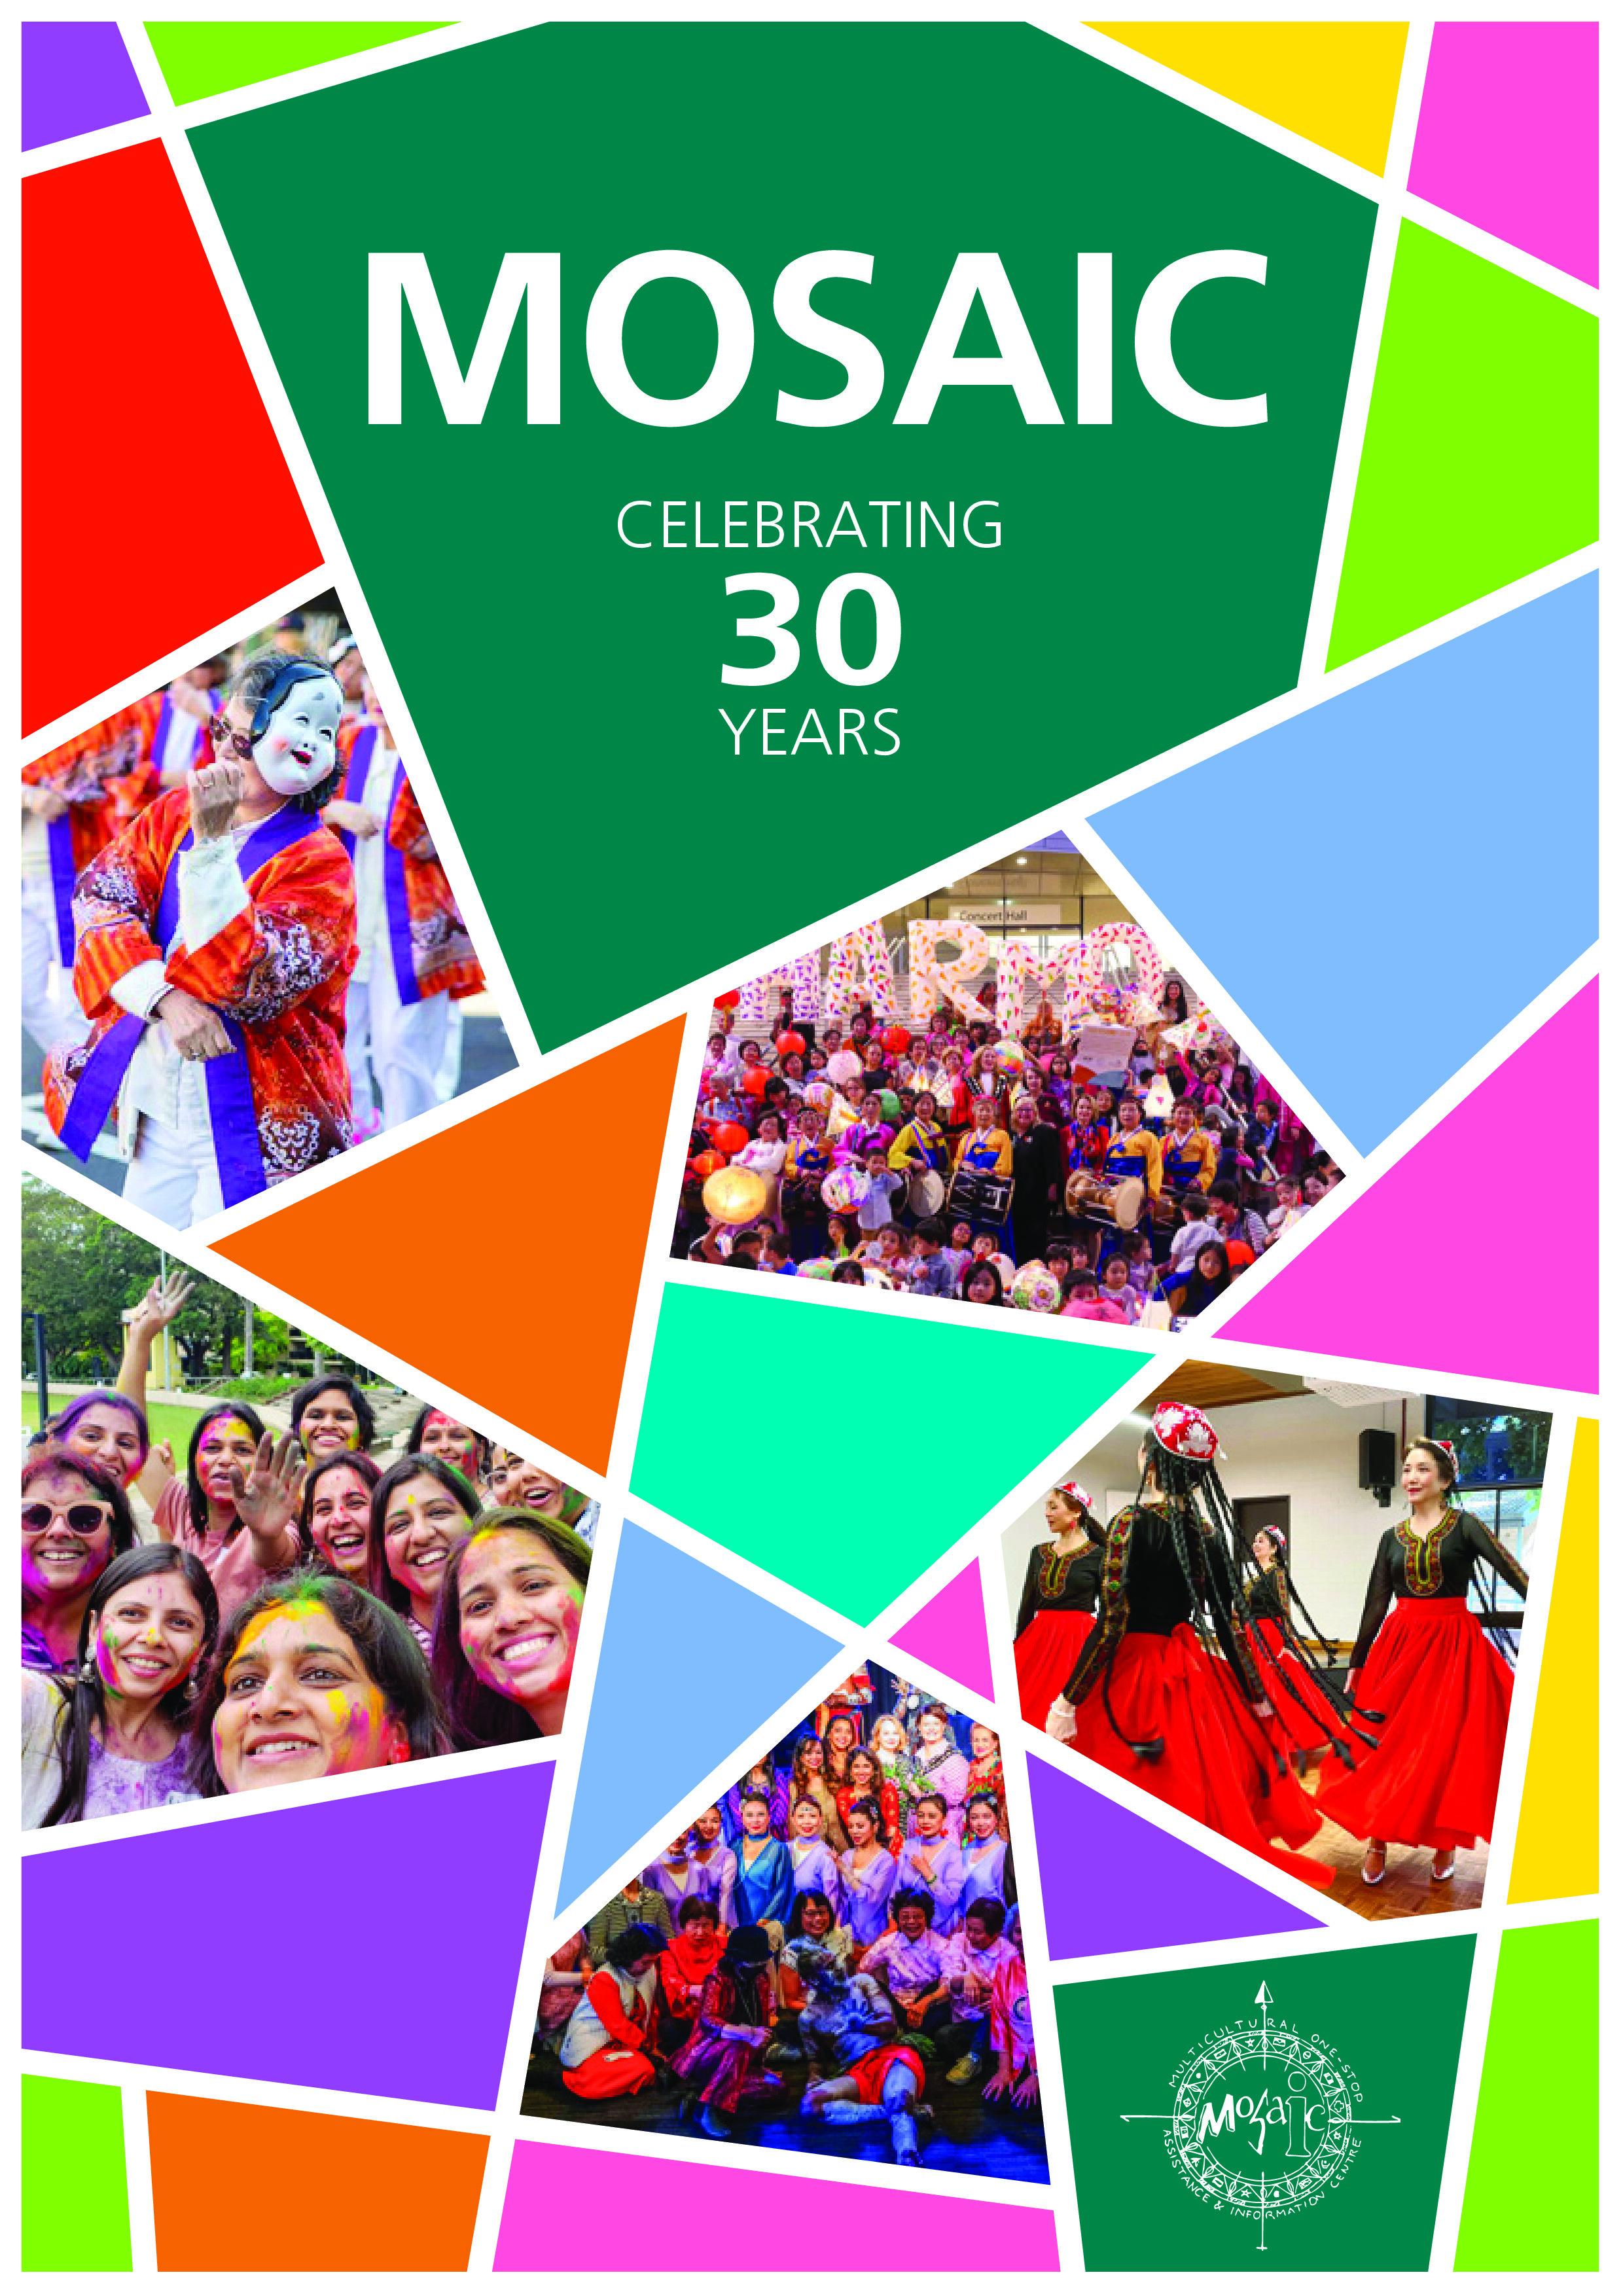 MOSAIC 30 years booklet